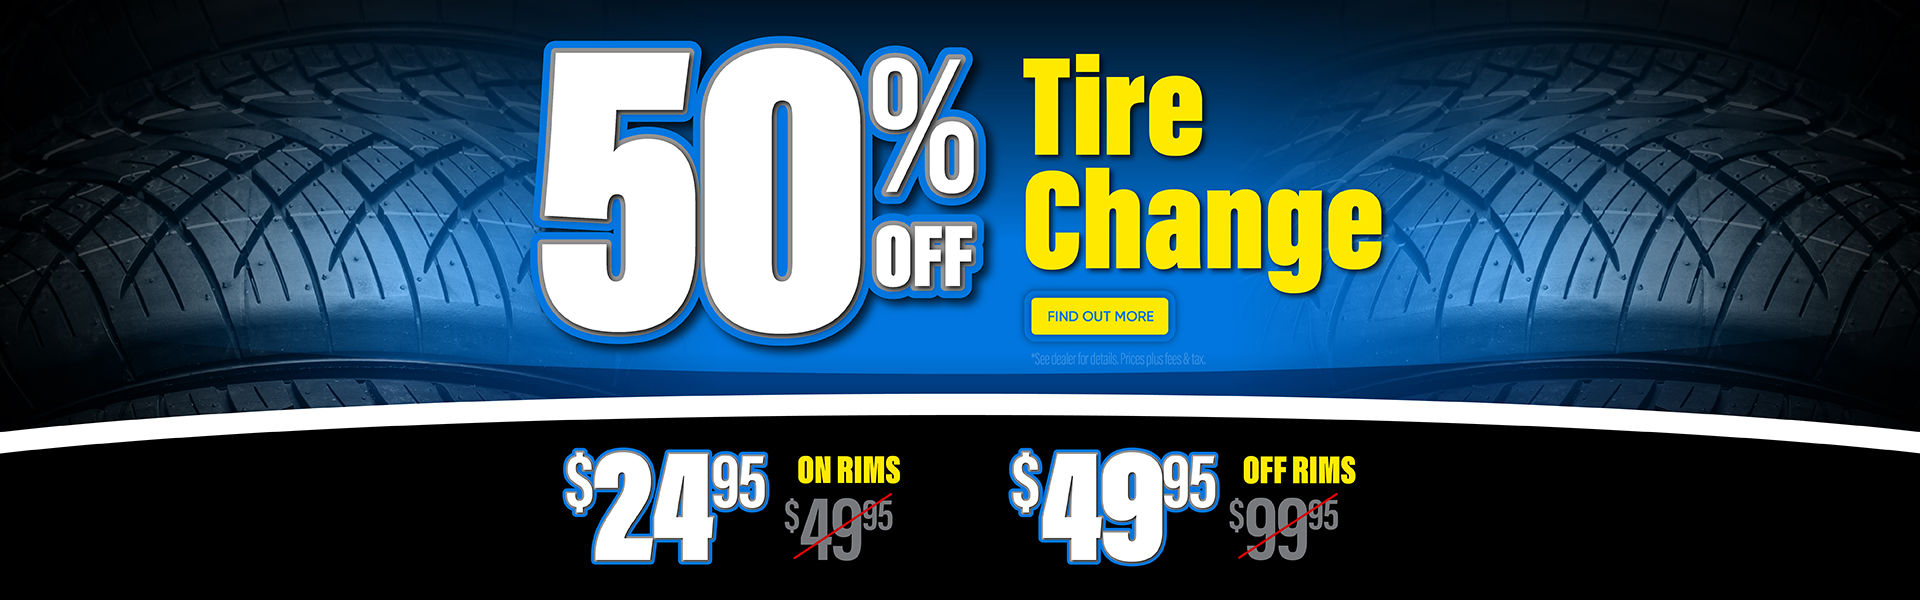 50% off Tire Changes until end of month